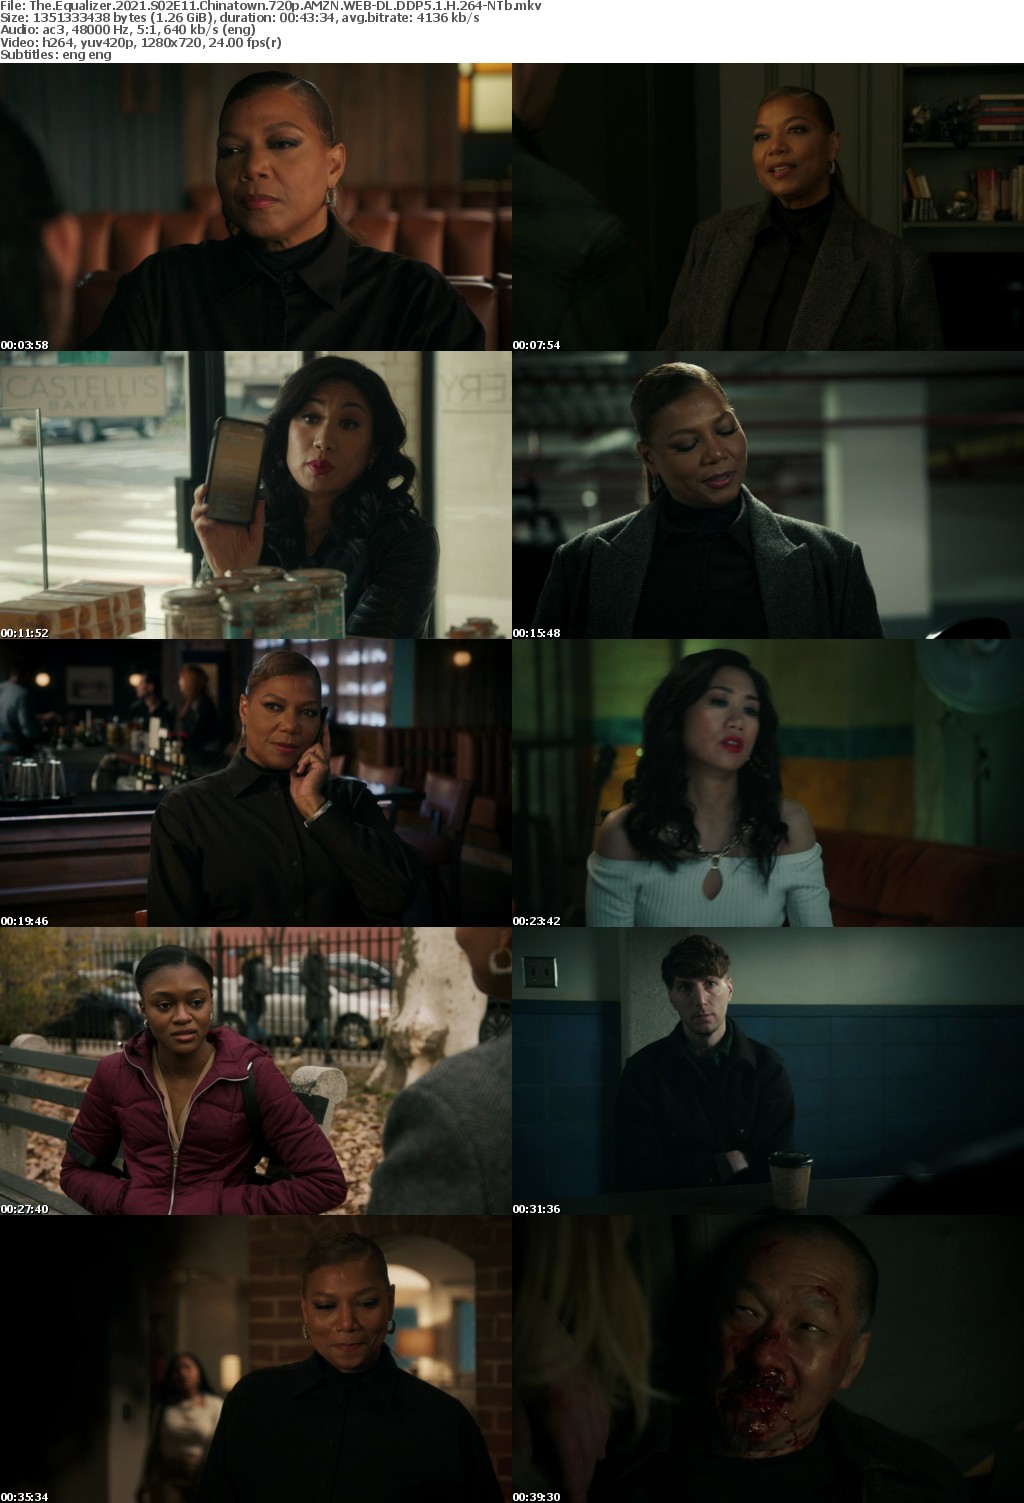 The Equalizer 2021 S02E11 Chinatown 720p AMZN WEBRip DDP5 1 x264-NTb